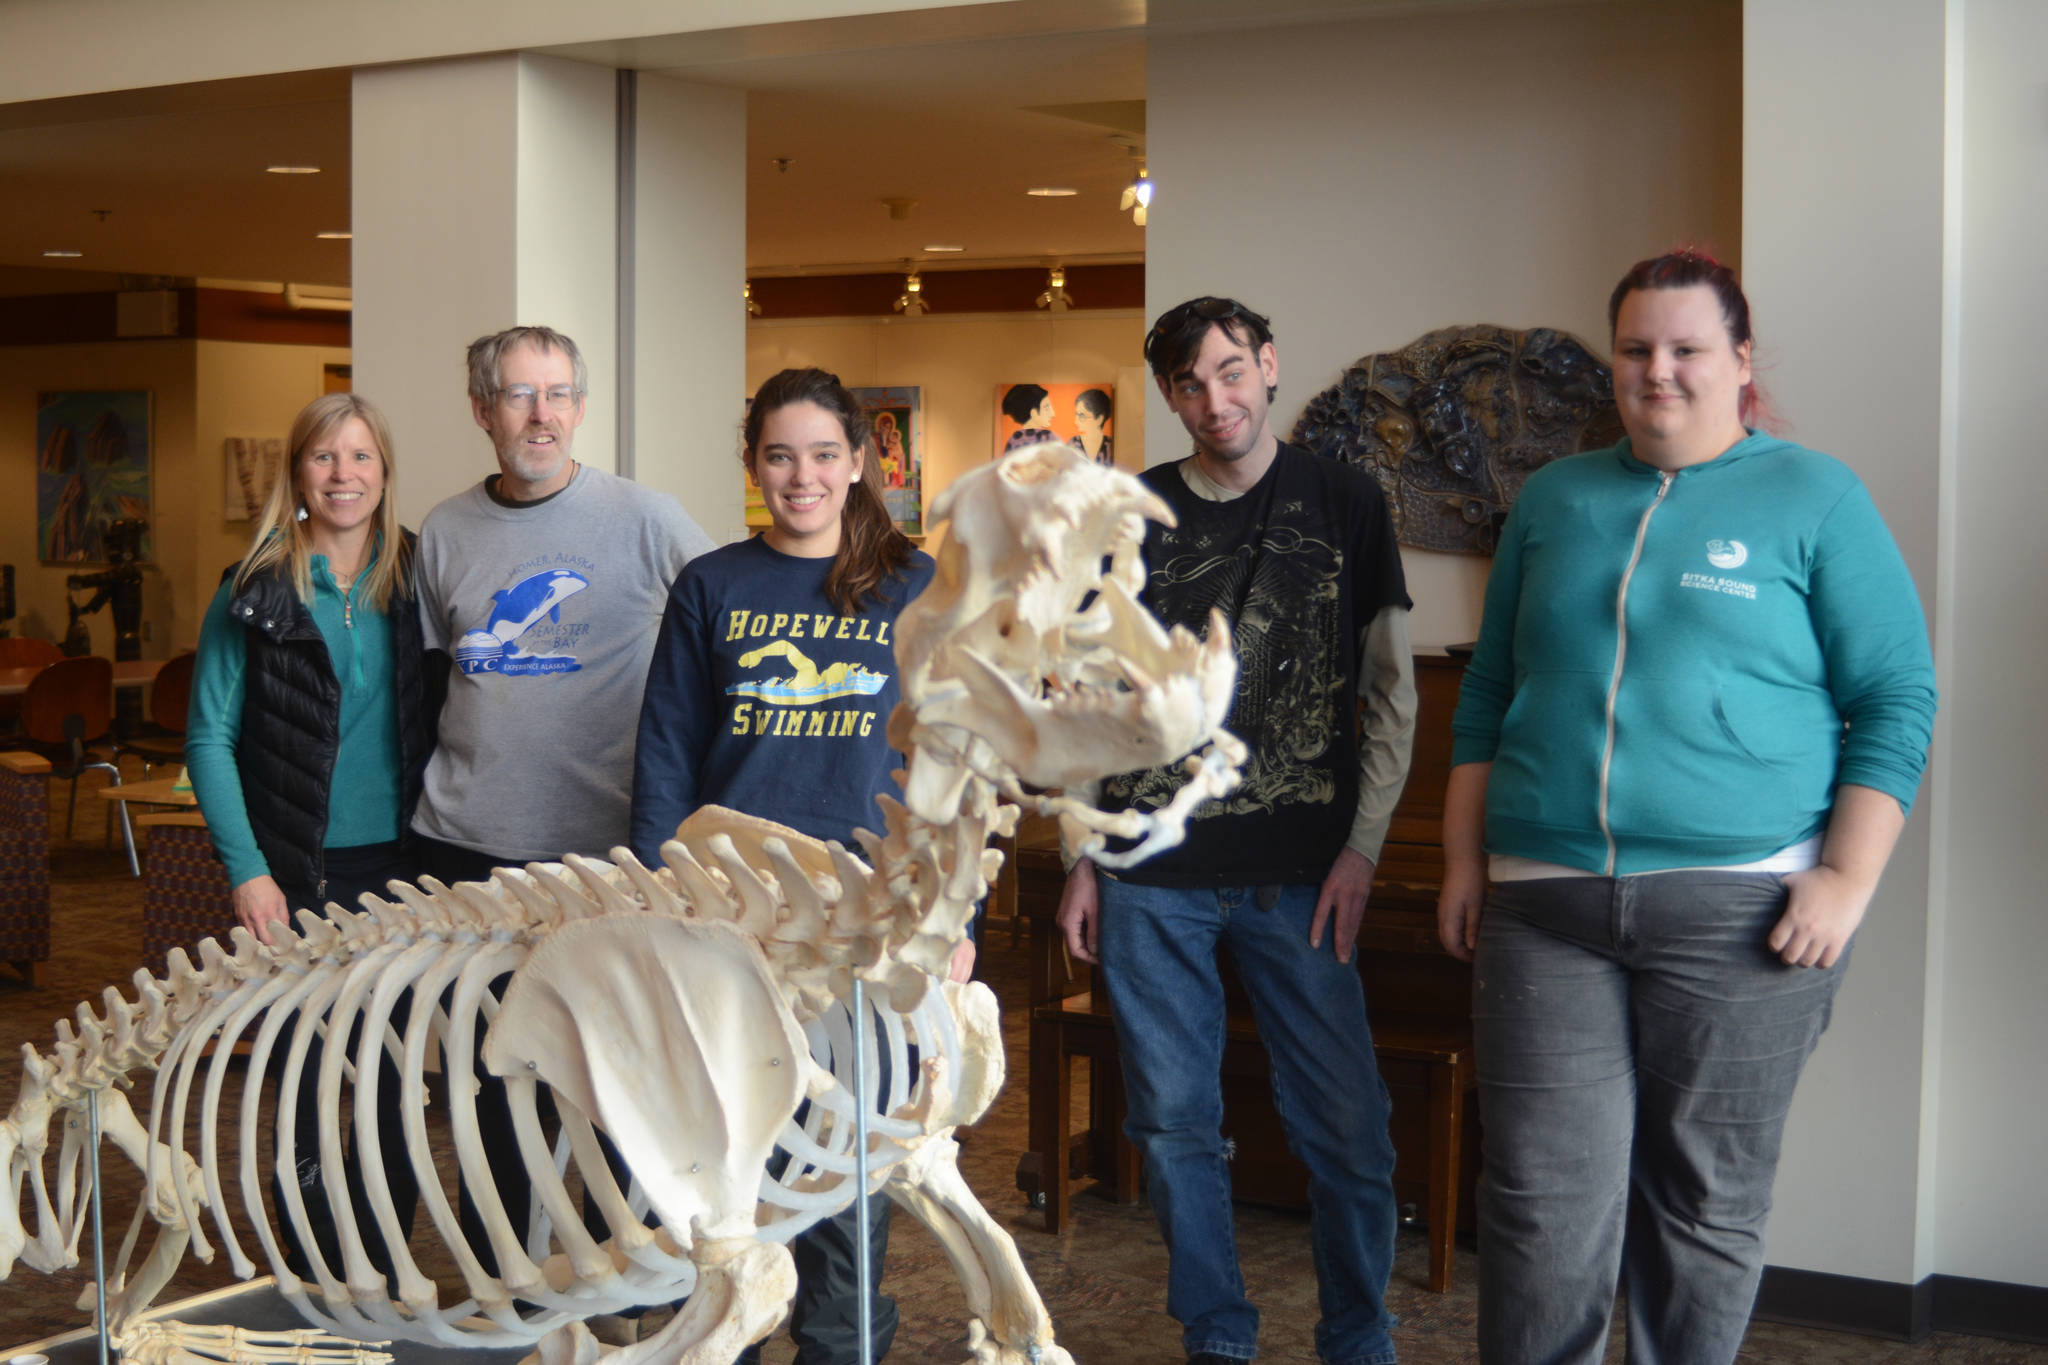 Posing behind the articulated skeleton of Woody, a sea lion from the Alaska SeaLife Center, on Wednesday, Nov. 22, are from left to right, Kachemak Bay Campus Biology Professor Debbie Boege-Tobin, Marine Skeletal Articulation Instructor Lee Post, Nicole Webster, Kyle Cullum, and Zobeida Rutkin in Pioneer Hall on Kachemak Bay Campus in Homer, Alaska. (Photo by Michael Armstrong, Homer News)